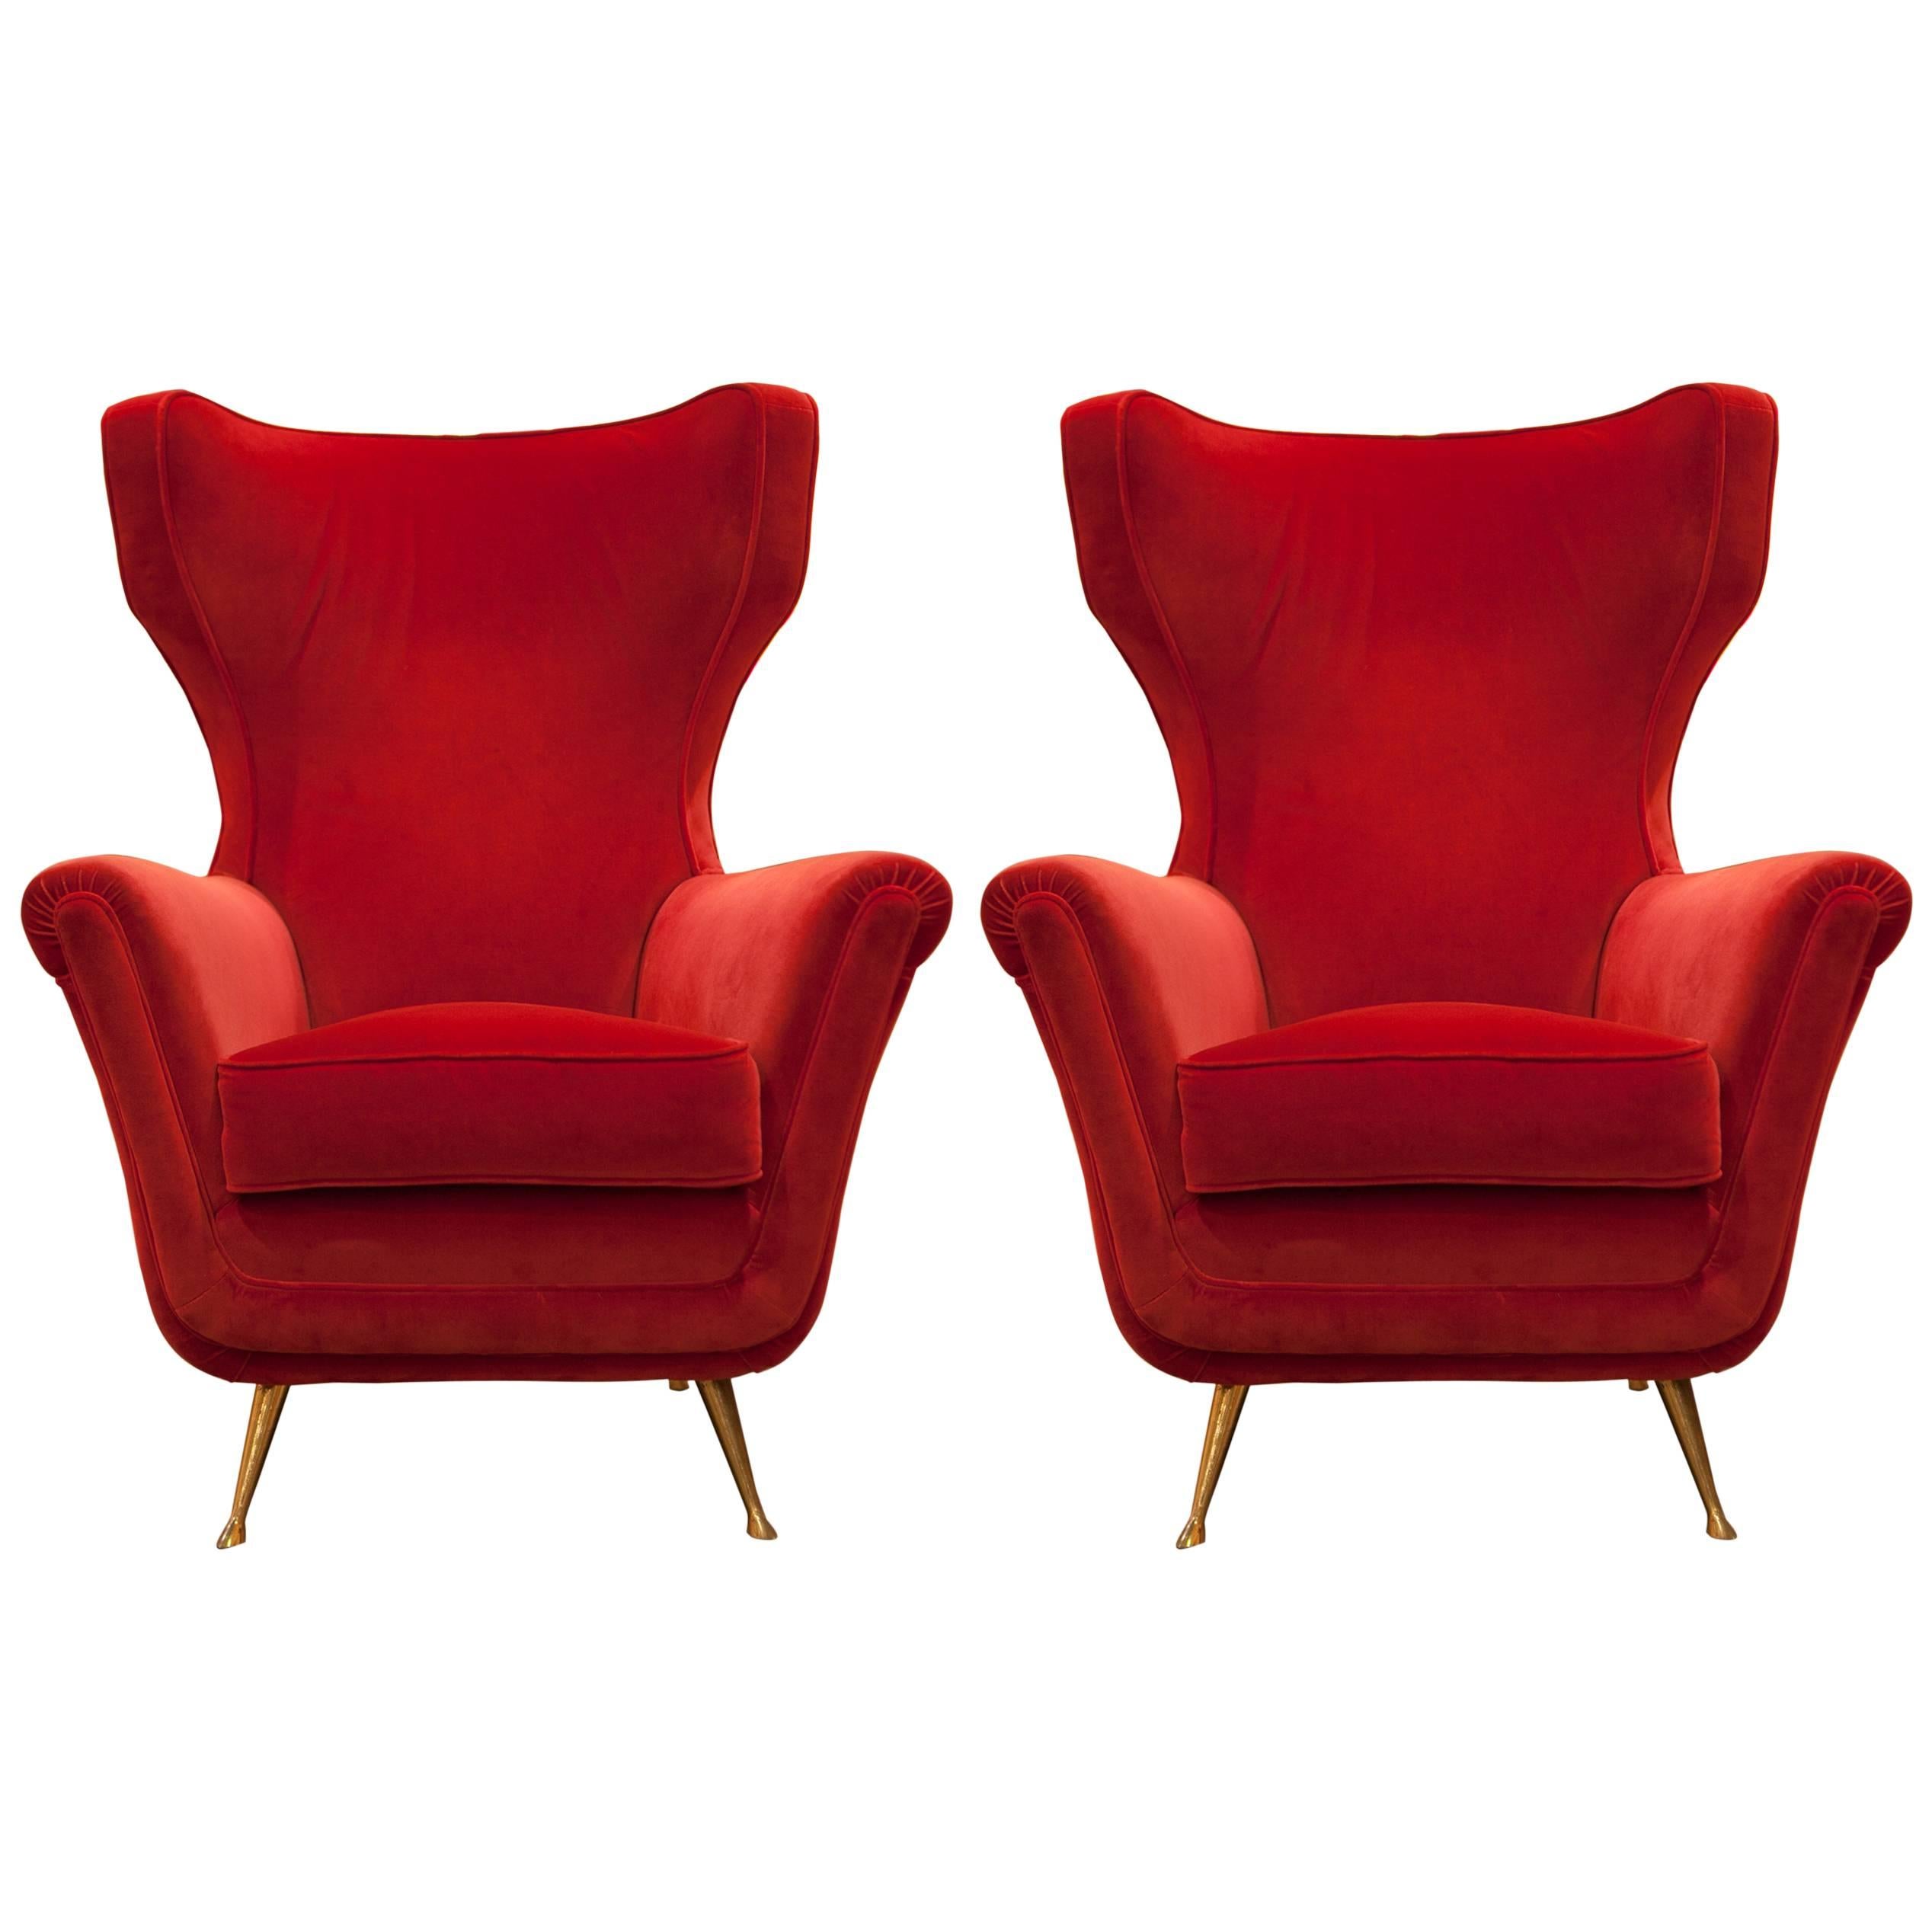 1960s Mid-Century Modern Red Italian Lounge Chairs in Velvet, Set of Two For Sale